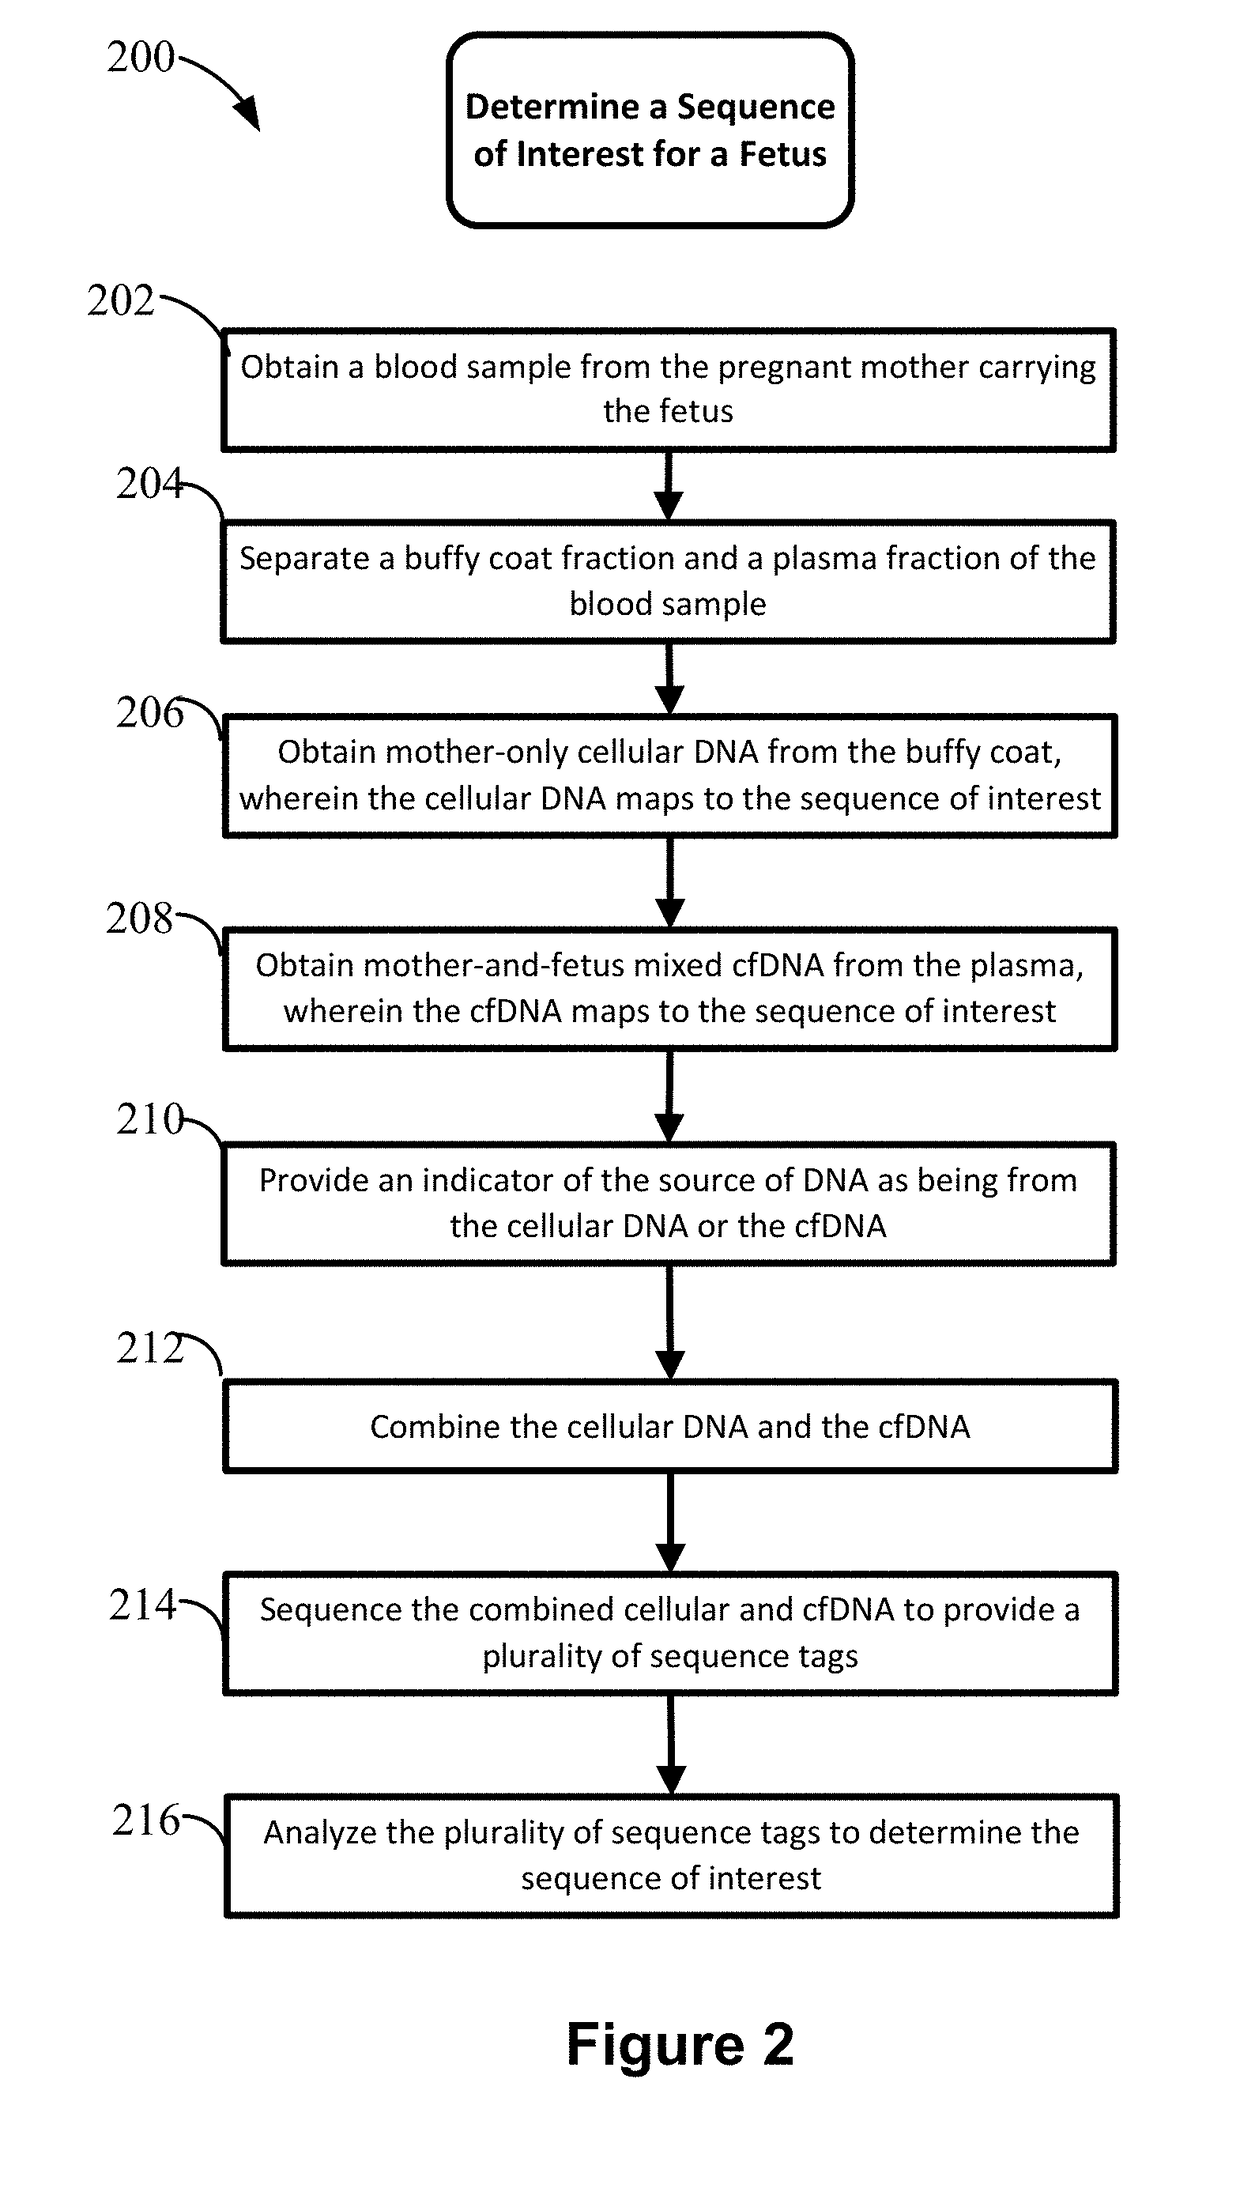 Non-invasive prenatal diagnosis of fetal genetic condition using cellular DNA and cell free DNA